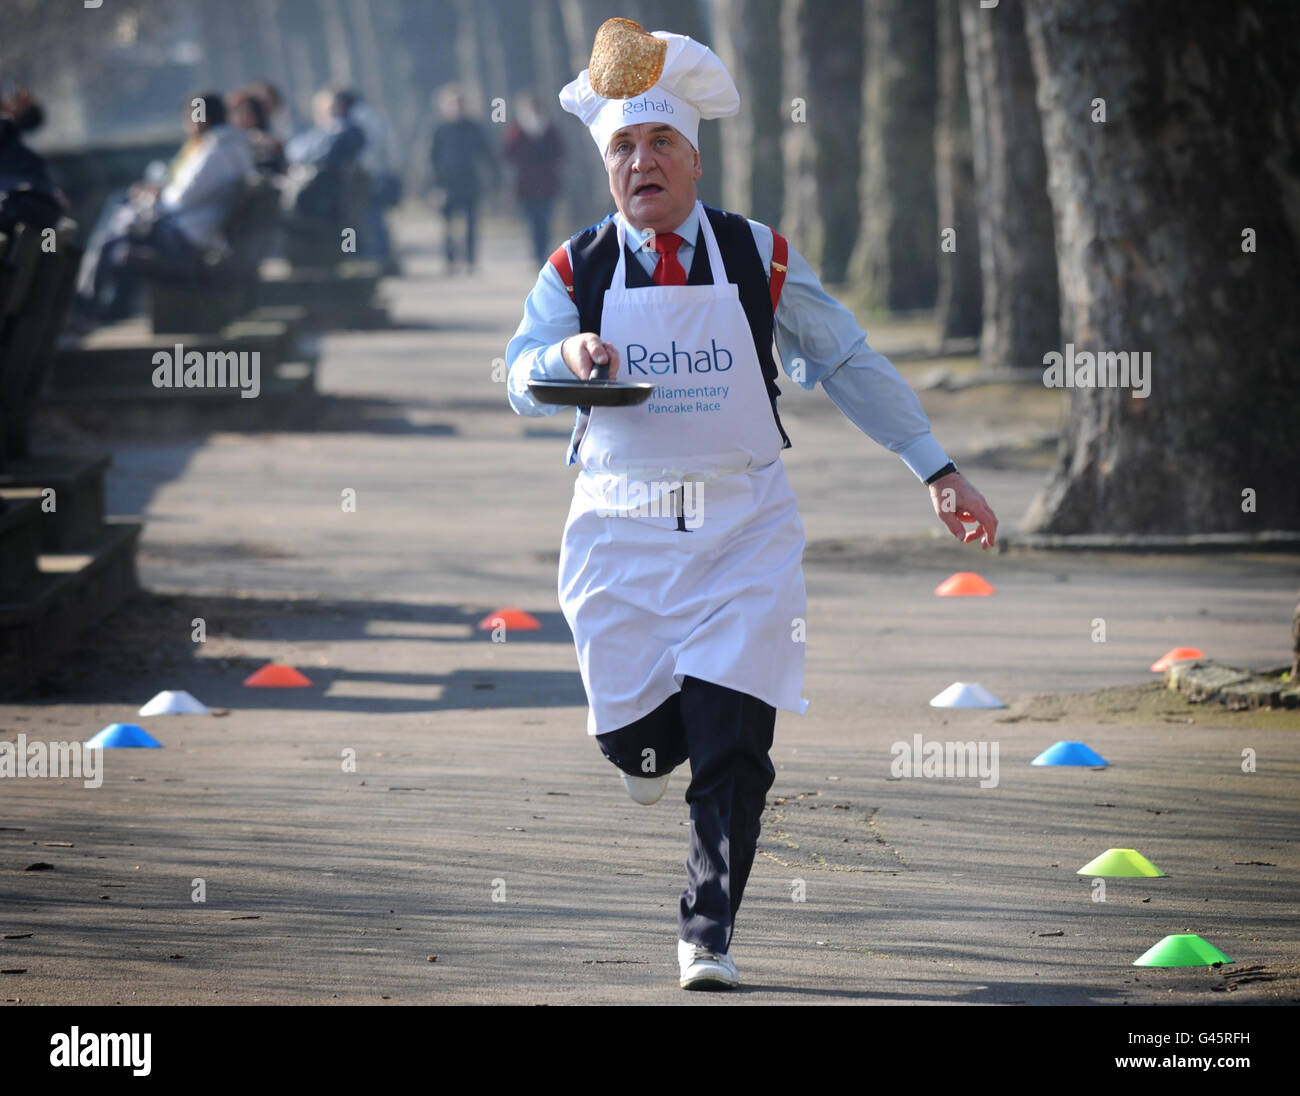 Labour MP Stephen Pound competes in the annual Rehab UK Parliamentary Pancake Race in Westminster, London, to help raise awareness for the charity - which helps people with diabilities. Stock Photo